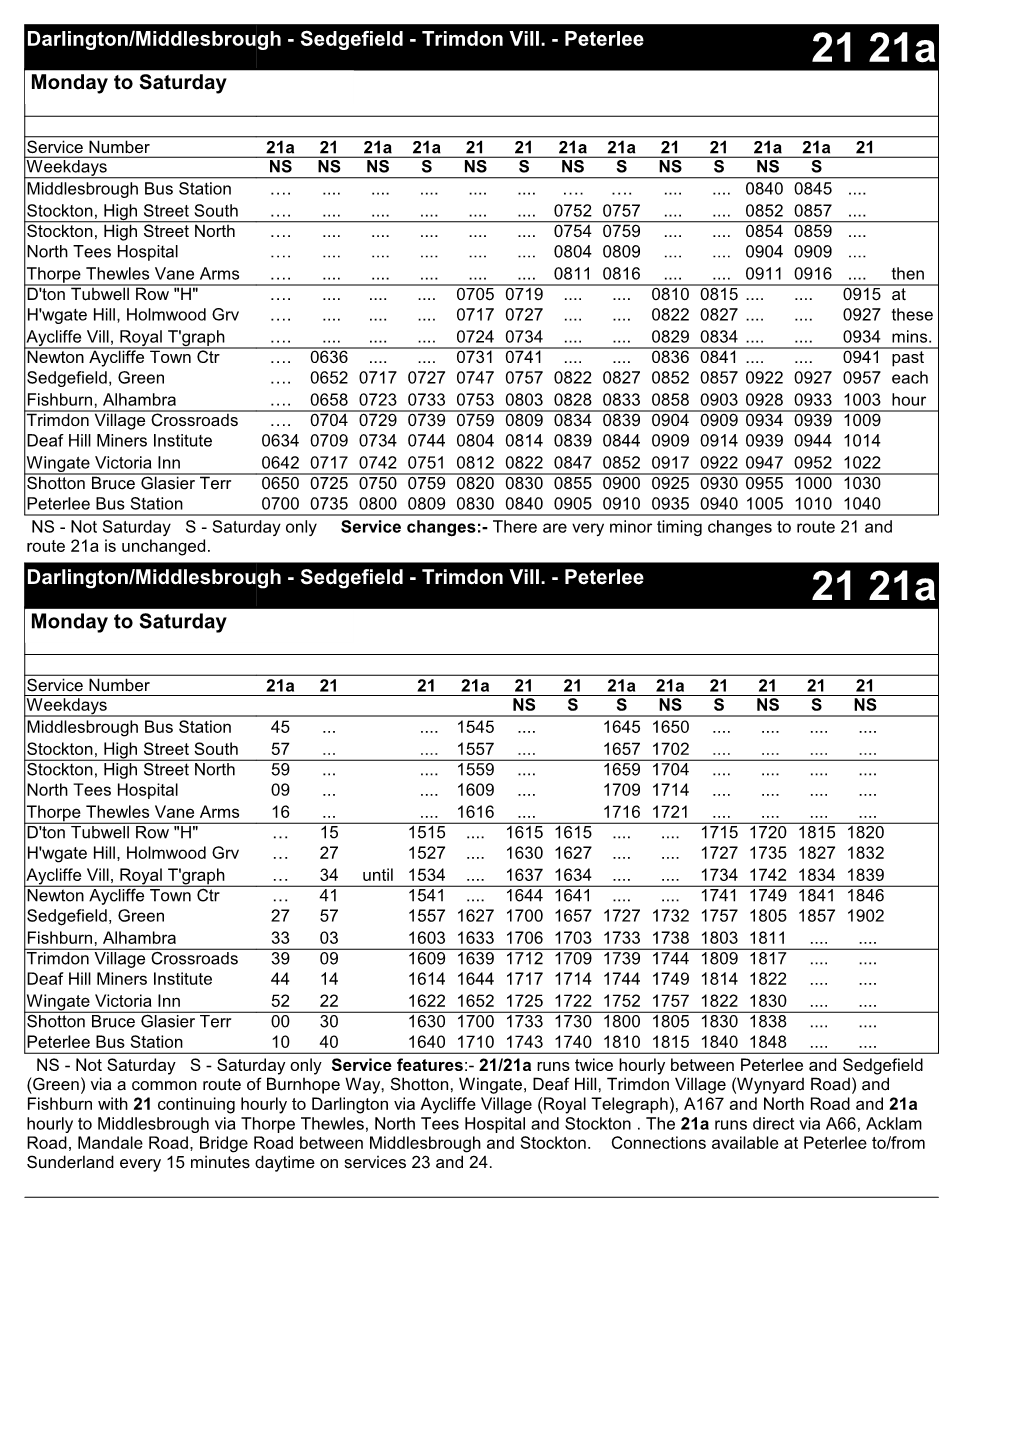 21 21A 21A 21 21 21A 21A 21 21 21A 21A 21 Weekdays NS NS NS S NS S NS S NS S NS S Middlesbrough Bus Station …